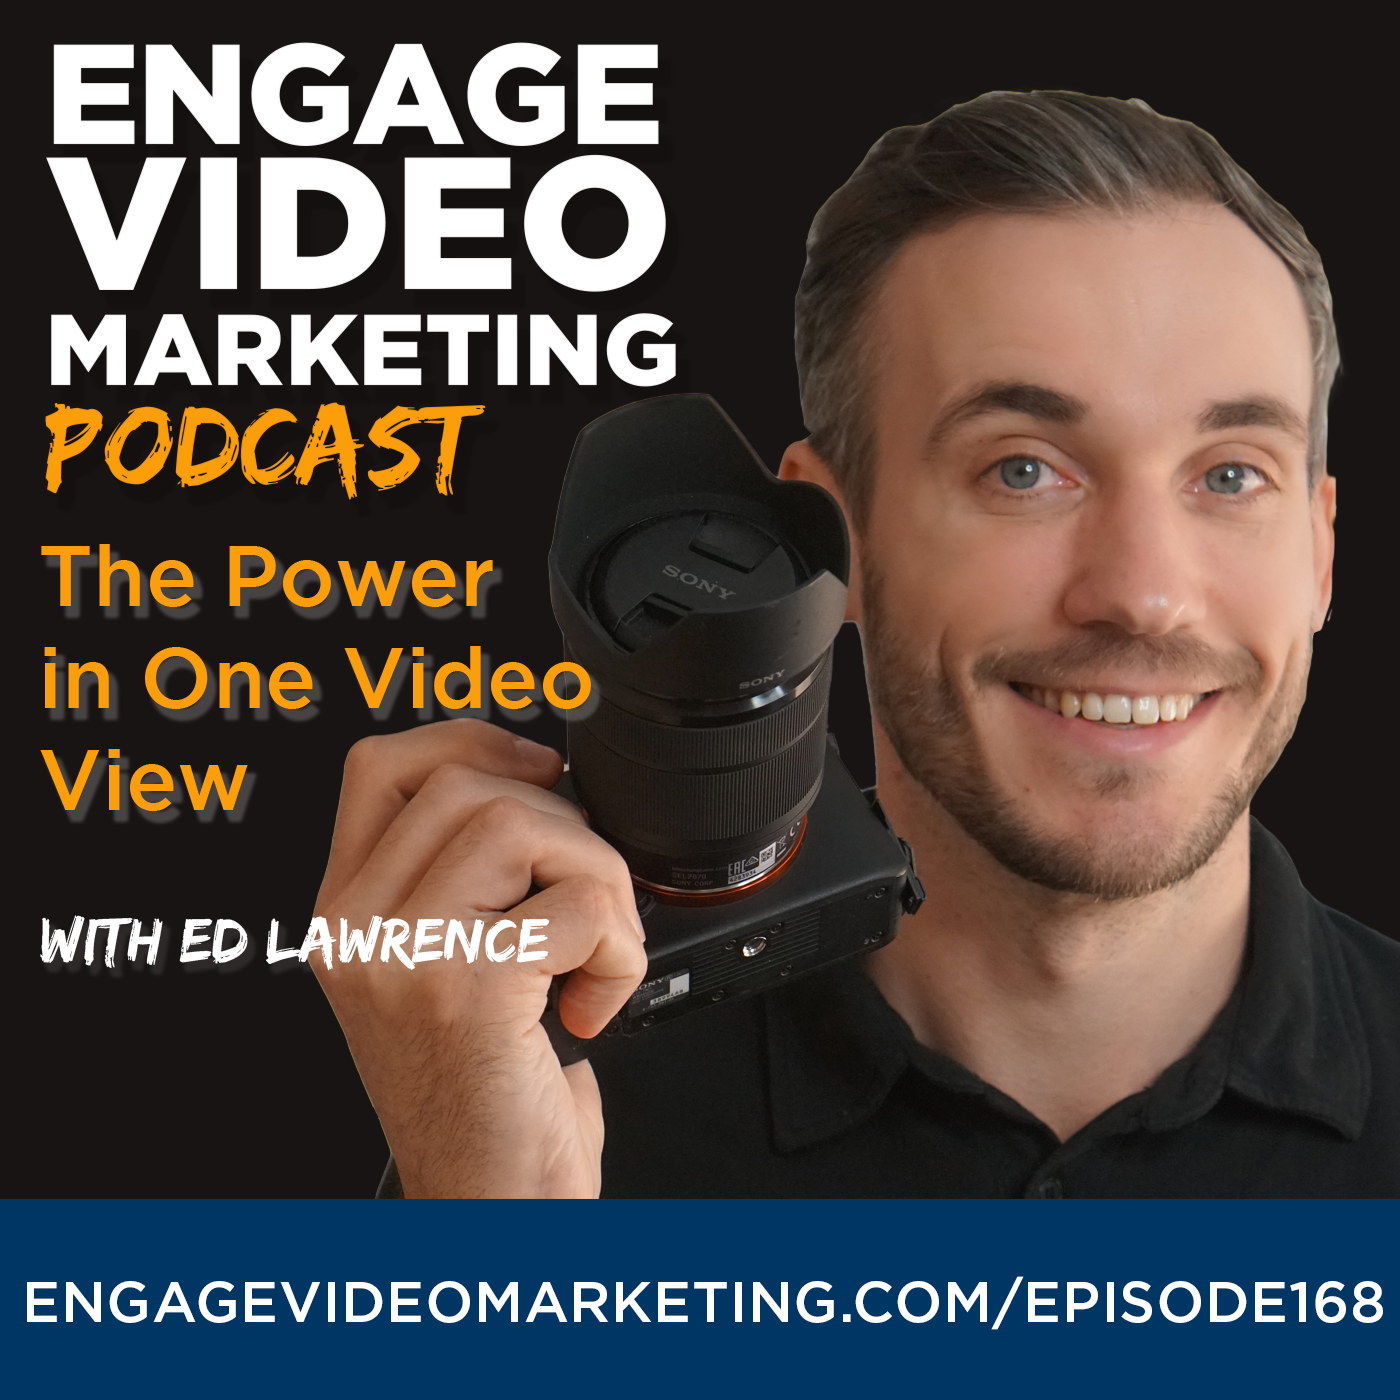 The Power in One Video View with Ed Lawrence